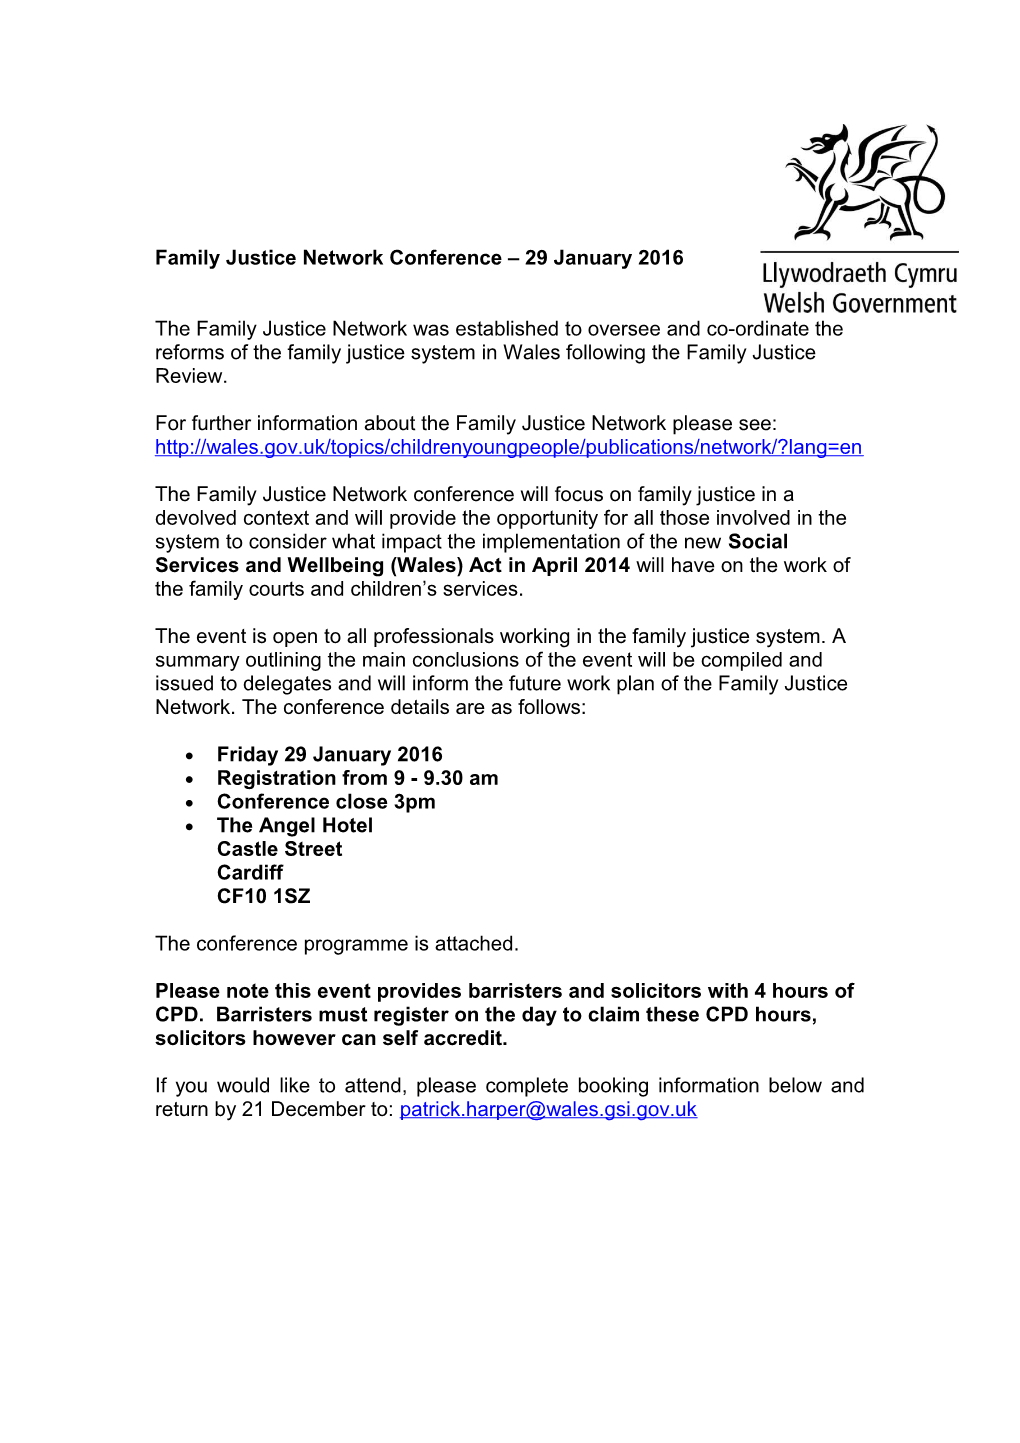 Family Justice Network Conference 29 January 2016